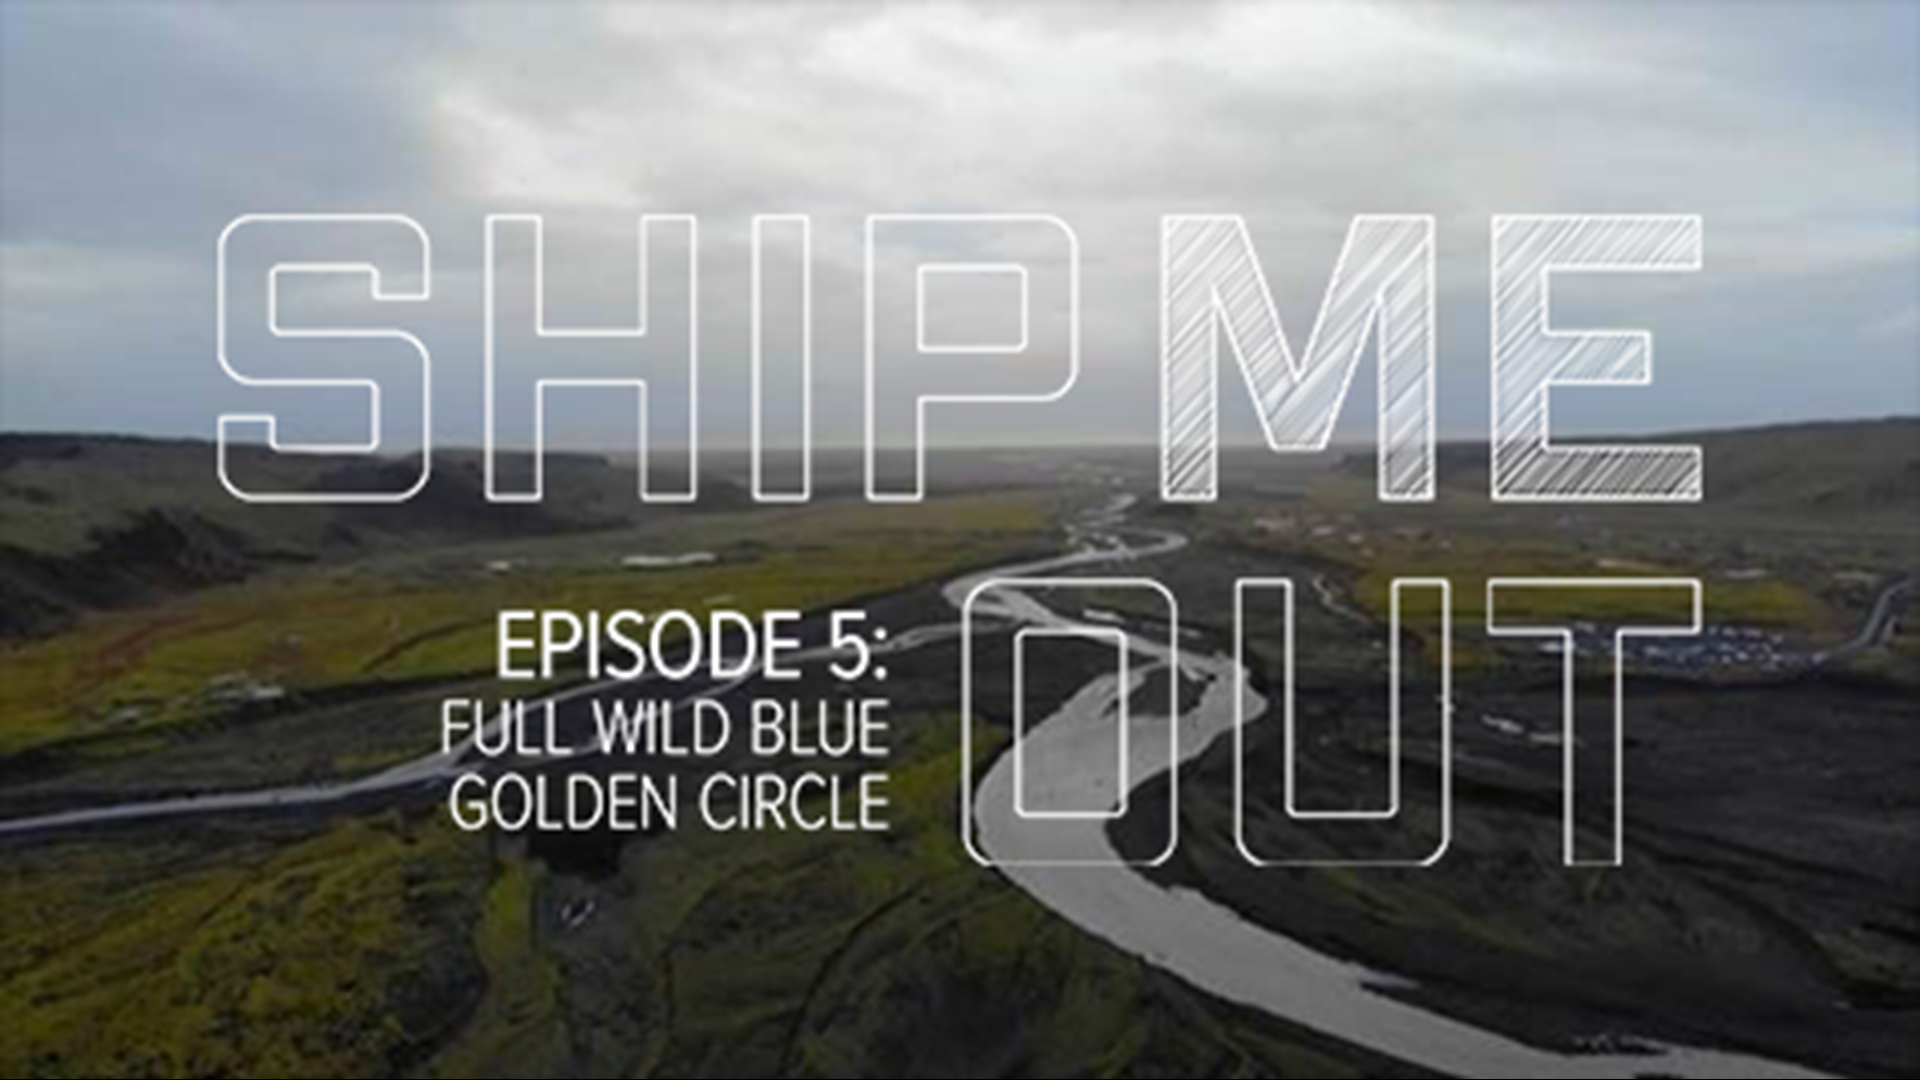 Could two lands with unique cultures and wild landscapes help each other confront 21st century challenges? This is Episode 5 of Ship ME Out.